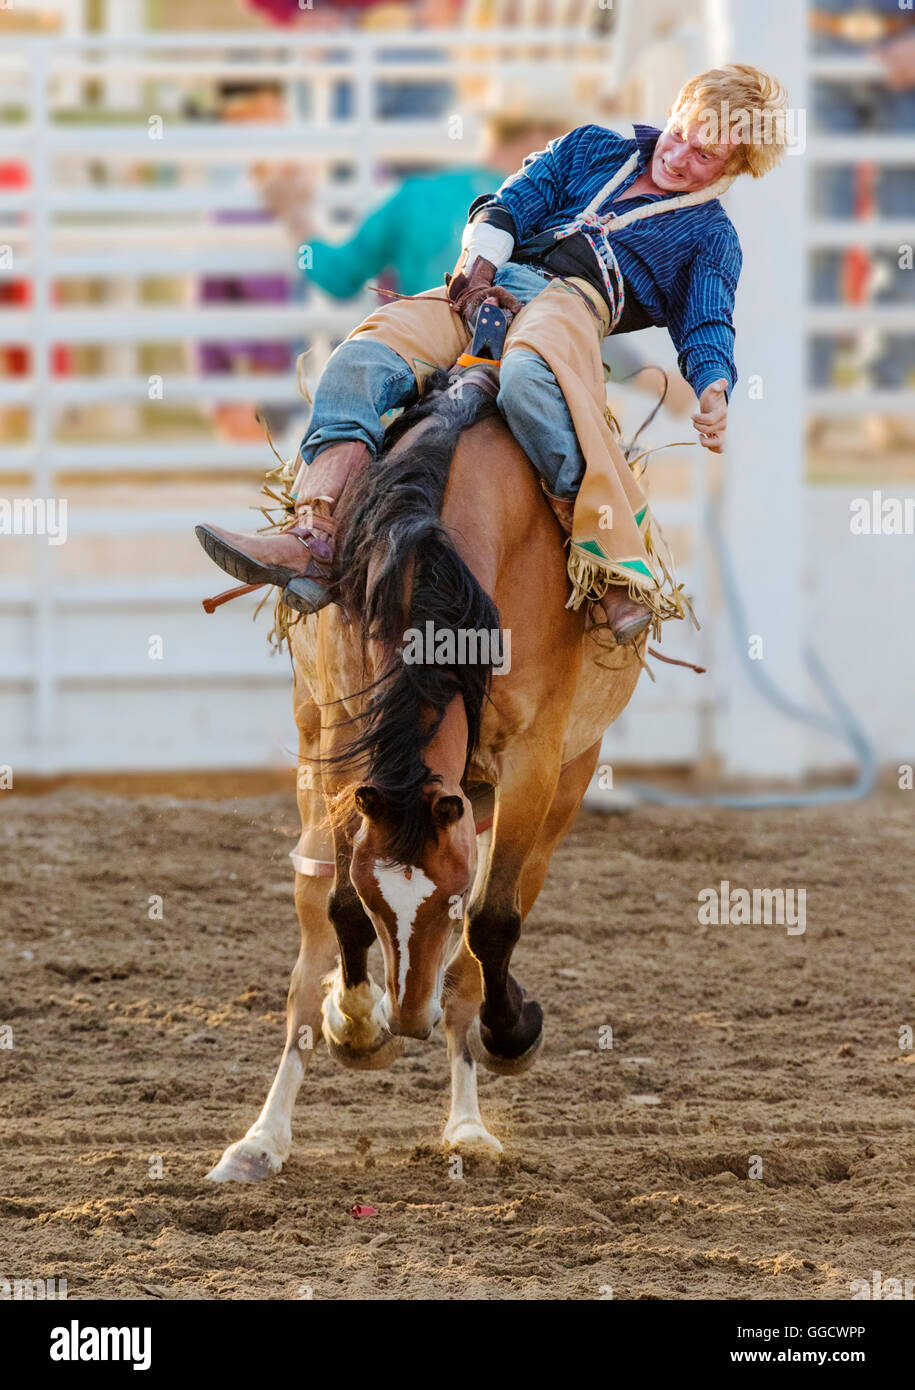 Rodeo cowboy riding a bucking horse, saddle bronc competition, Chaffee County Fair & Rodeo, Salida, Colorado, USA Stock Photo